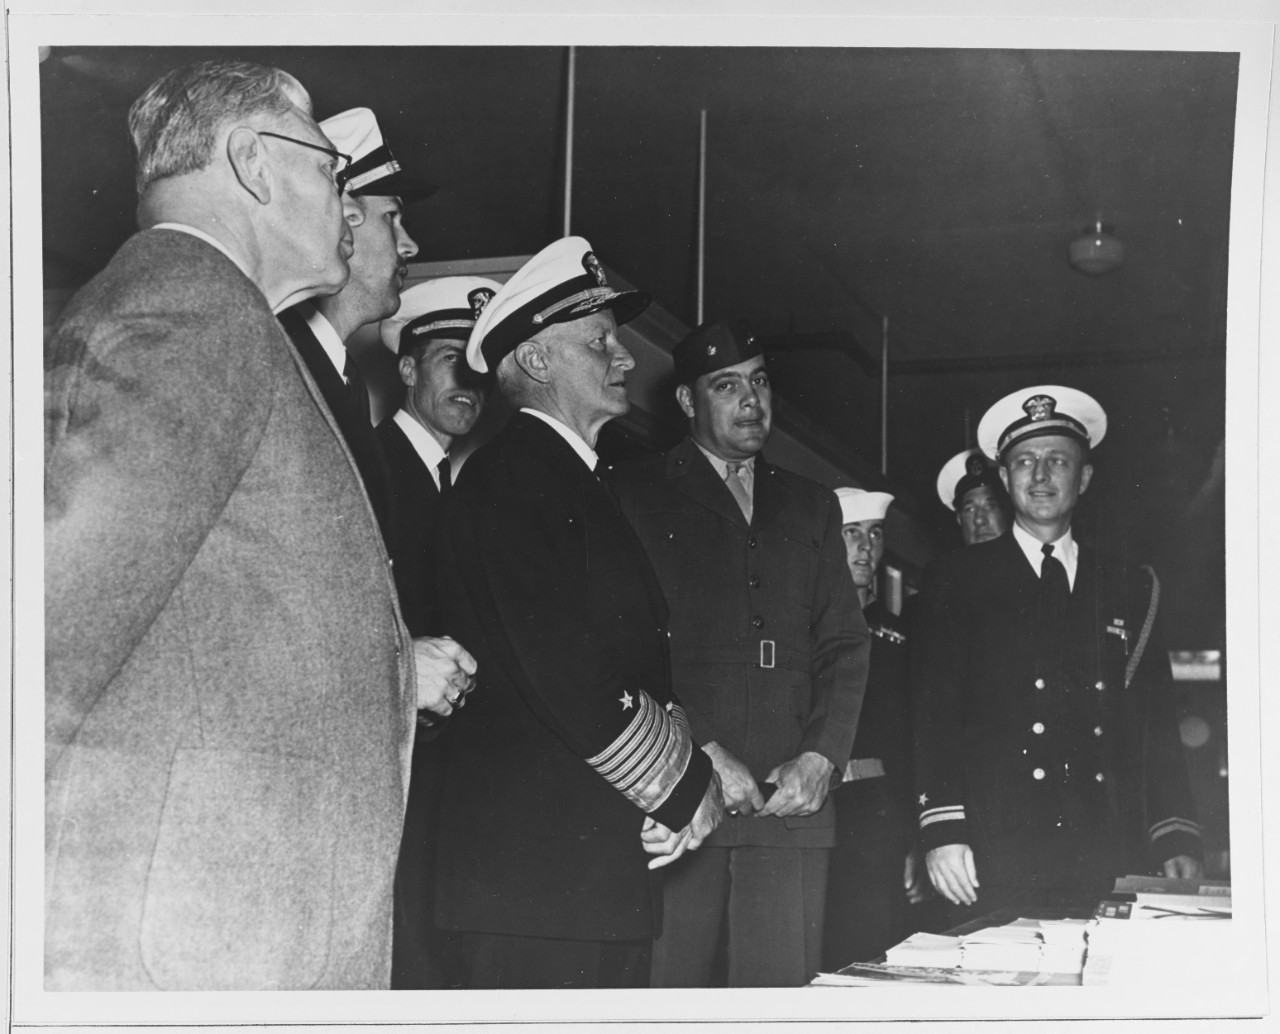 Fleet Admiral Nimitz Inspects a Bulletin Board during a Visit to the Naval Reserve Training Center, Fresno